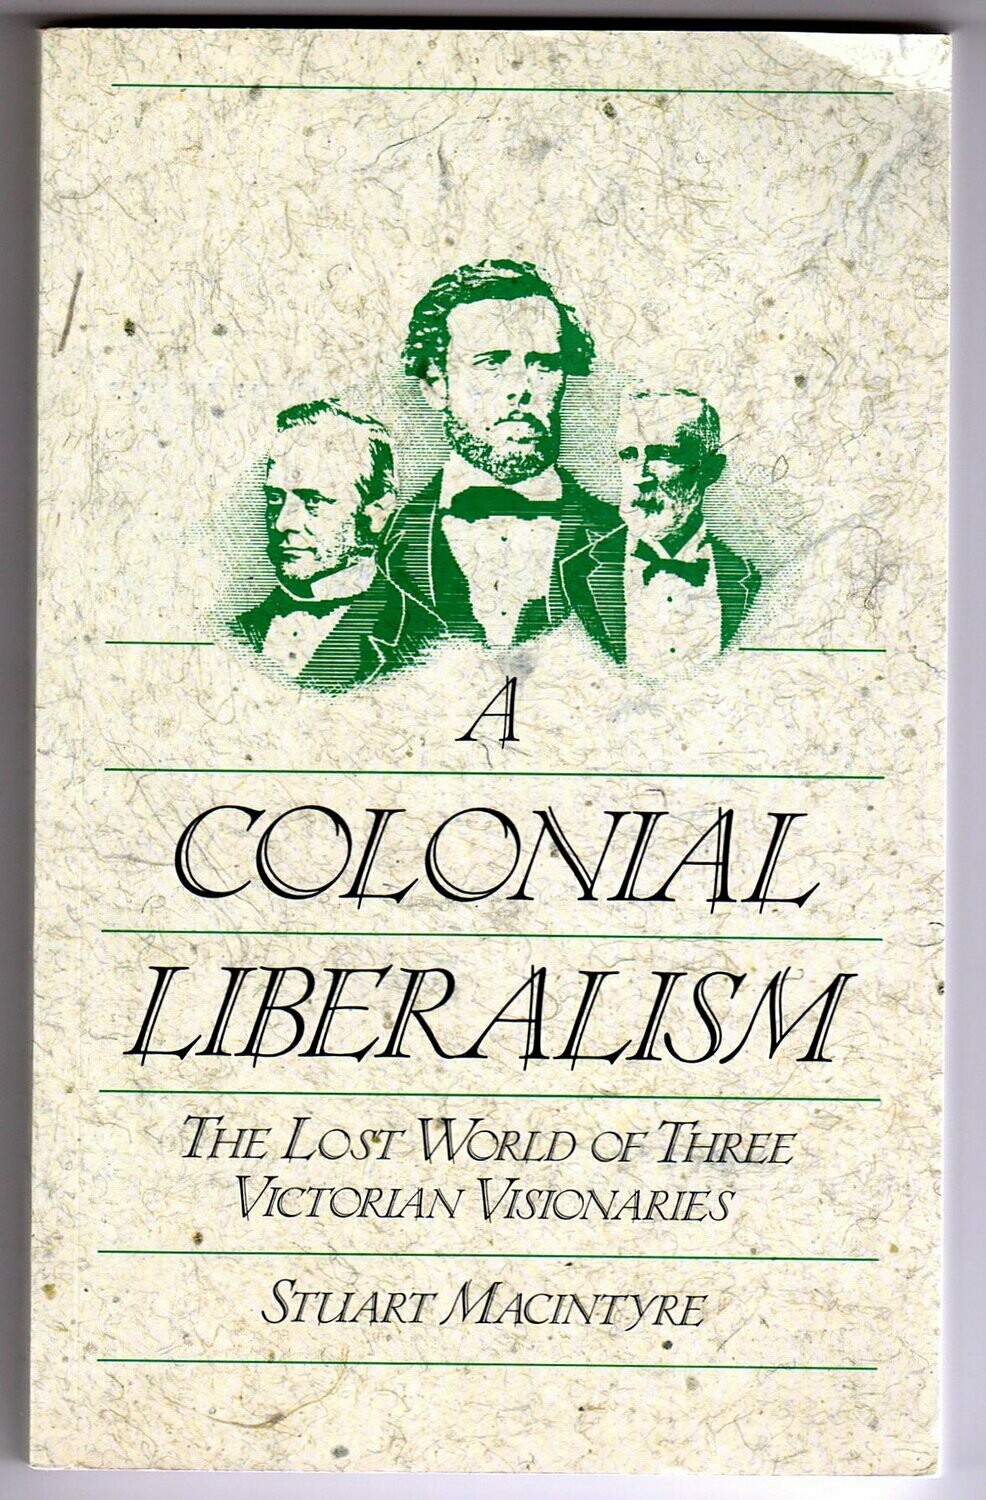 A Colonial Liberalism: The Lost World of Three Victorian Visionaries by Stuart Macintyre